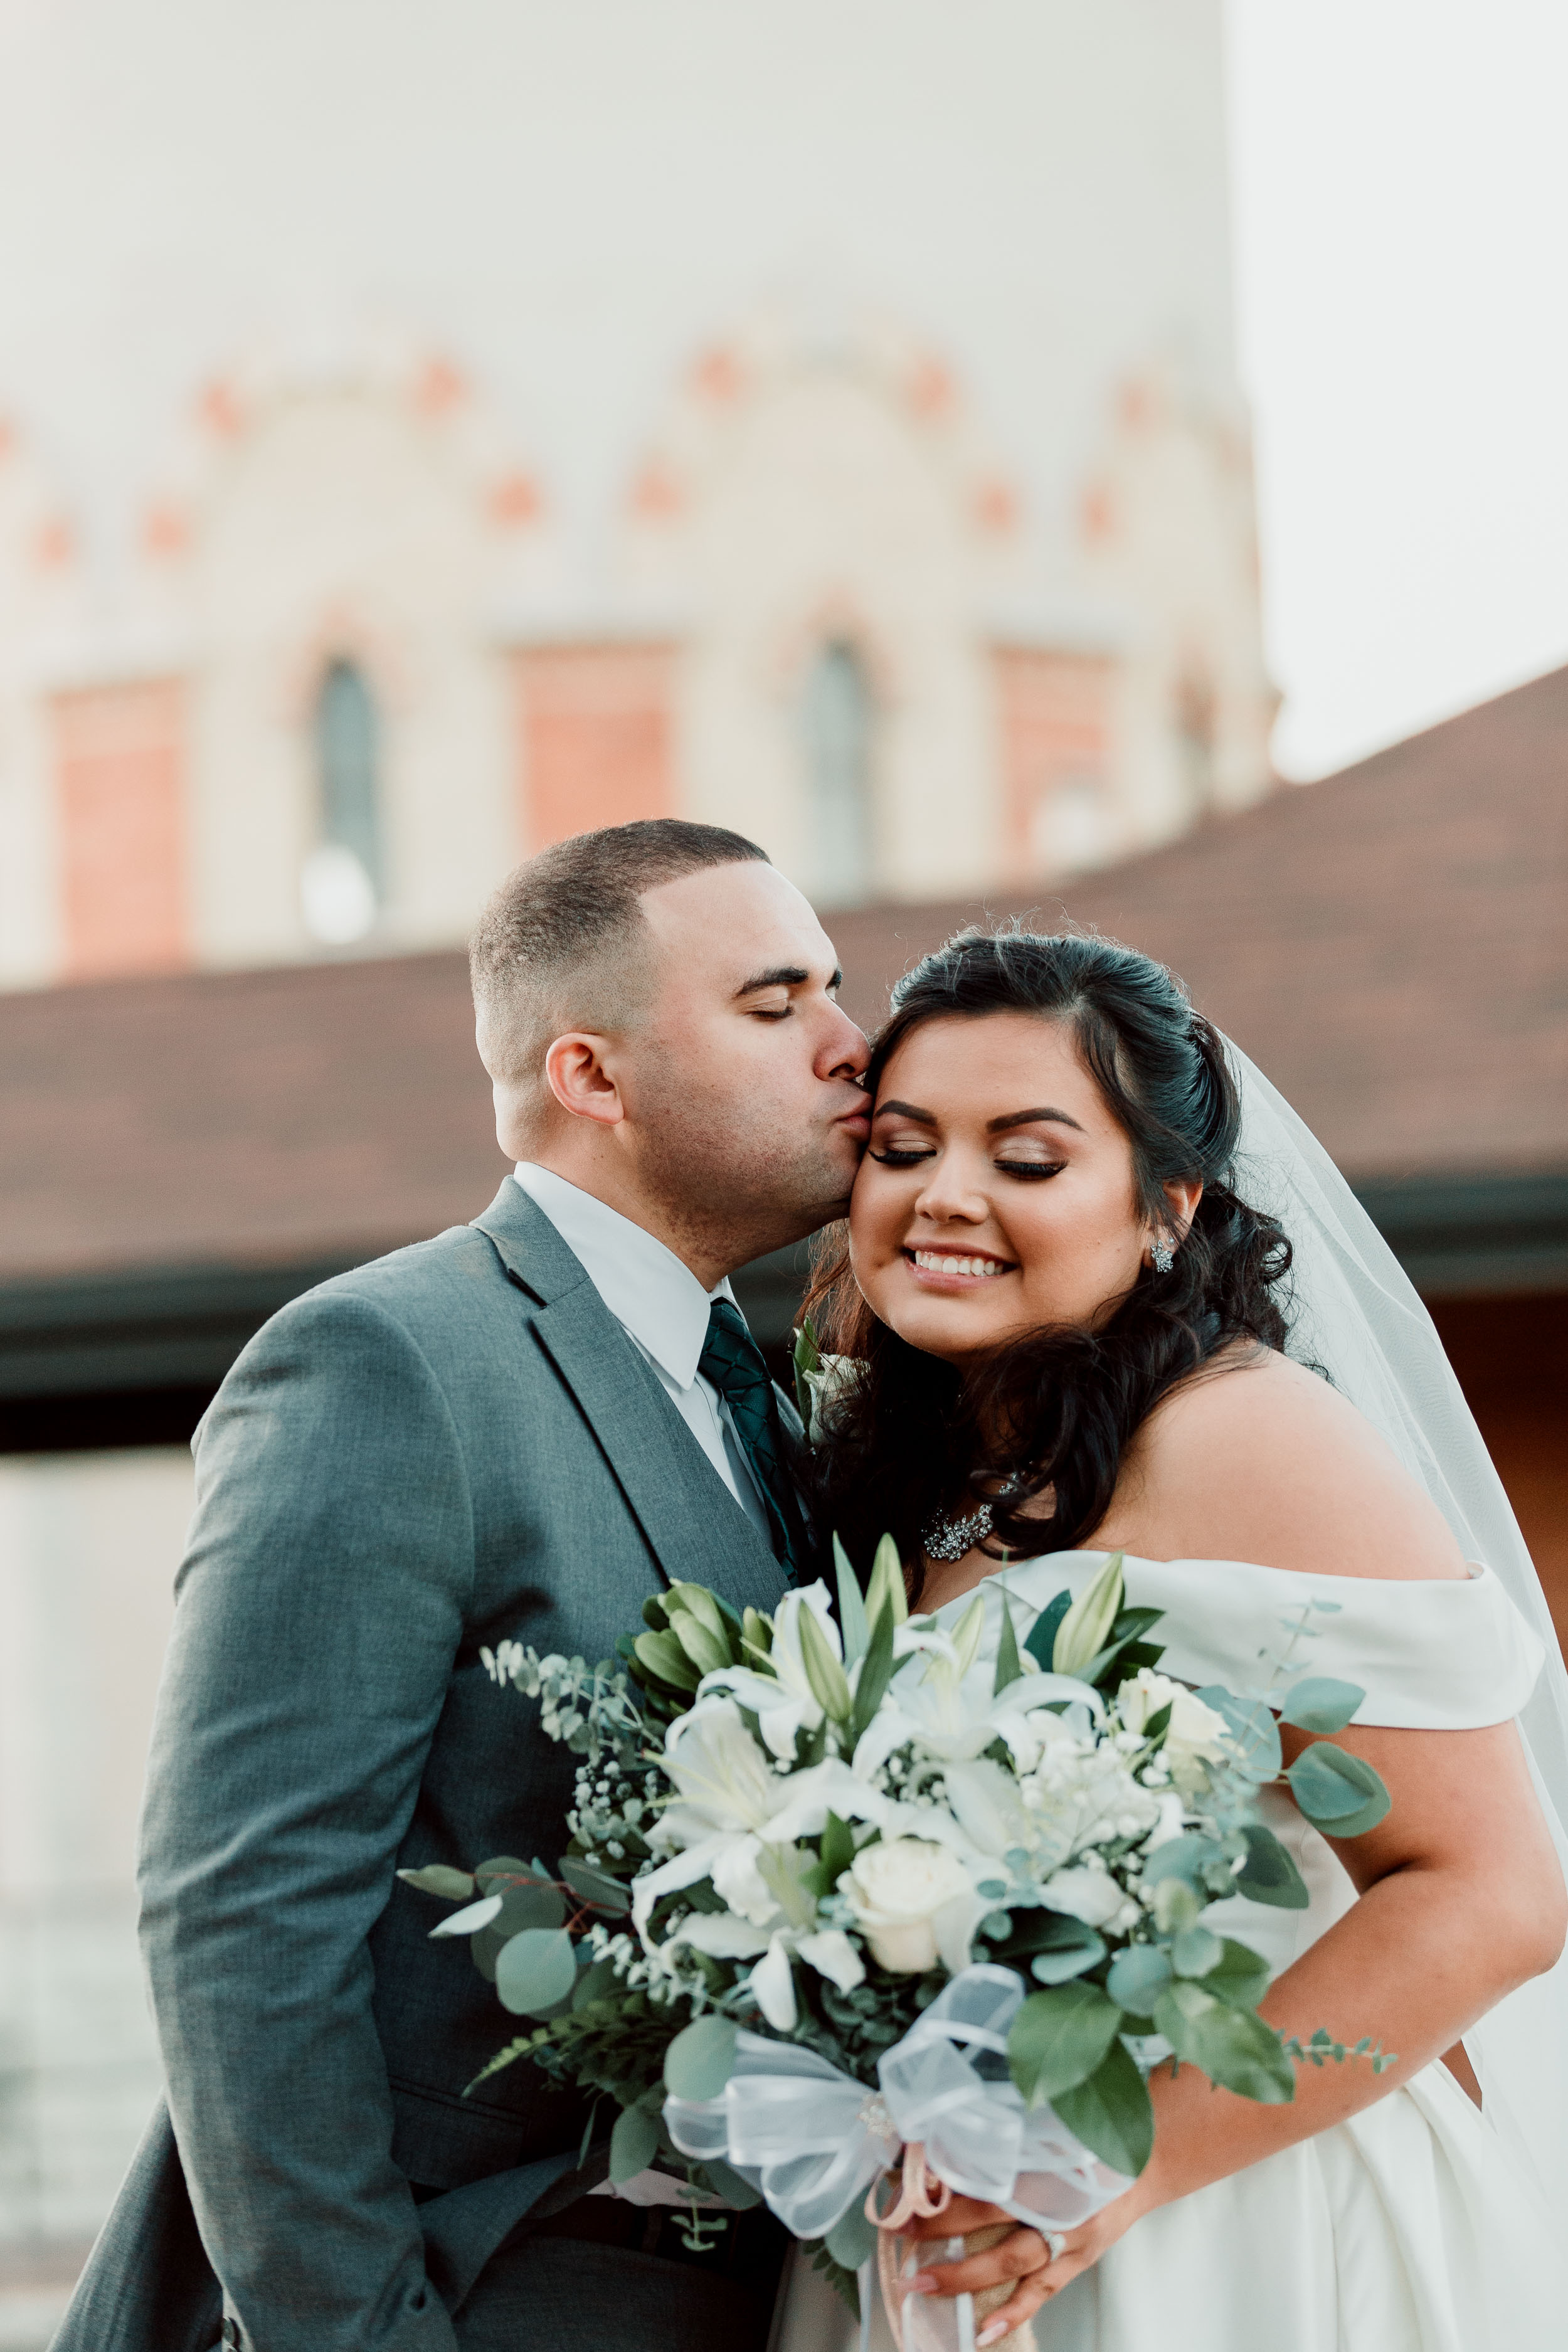 Poses for Wedding Photos | Backyard Chicago Wedding | Emotional Chicago Wedding | Historic Downtown Riverside Wedding Photos | Chicago Wedding Photographer | Metra Station Wedding Photos | Small Weddings in Chicago | Intimate Elopements in Chicago